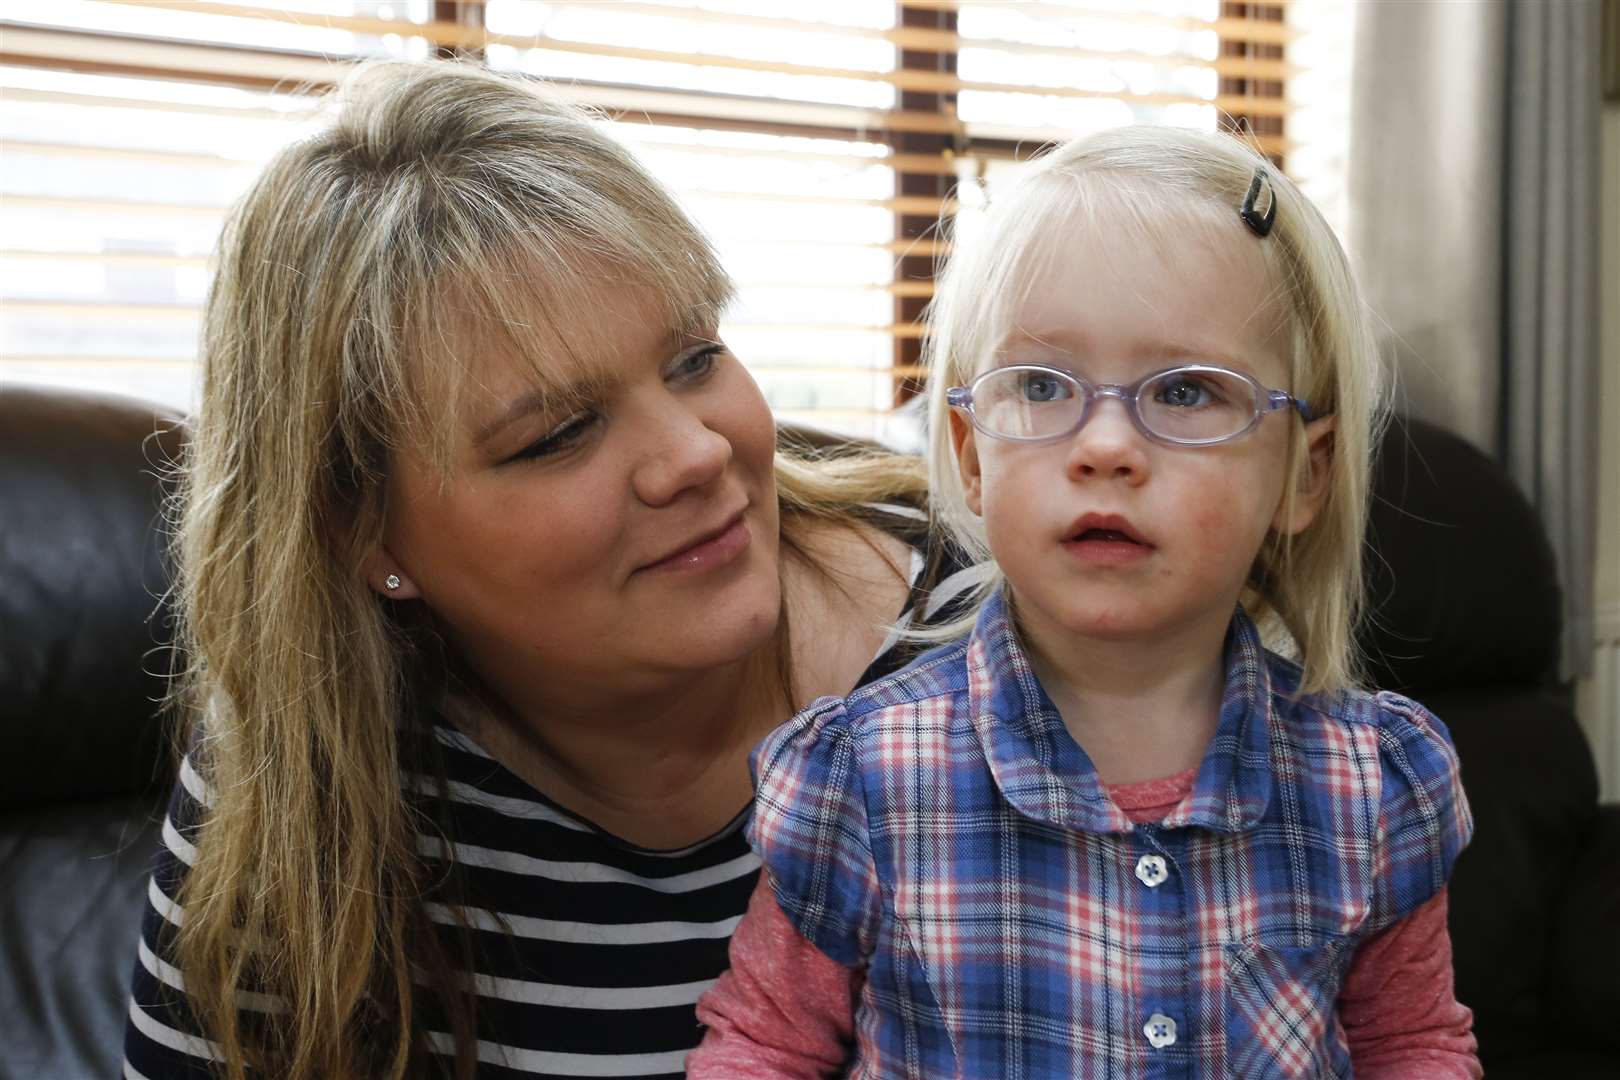 Catherine Farragher with daughter Eliana - who has a form of cerebral palsy, and needs a specialist operation.